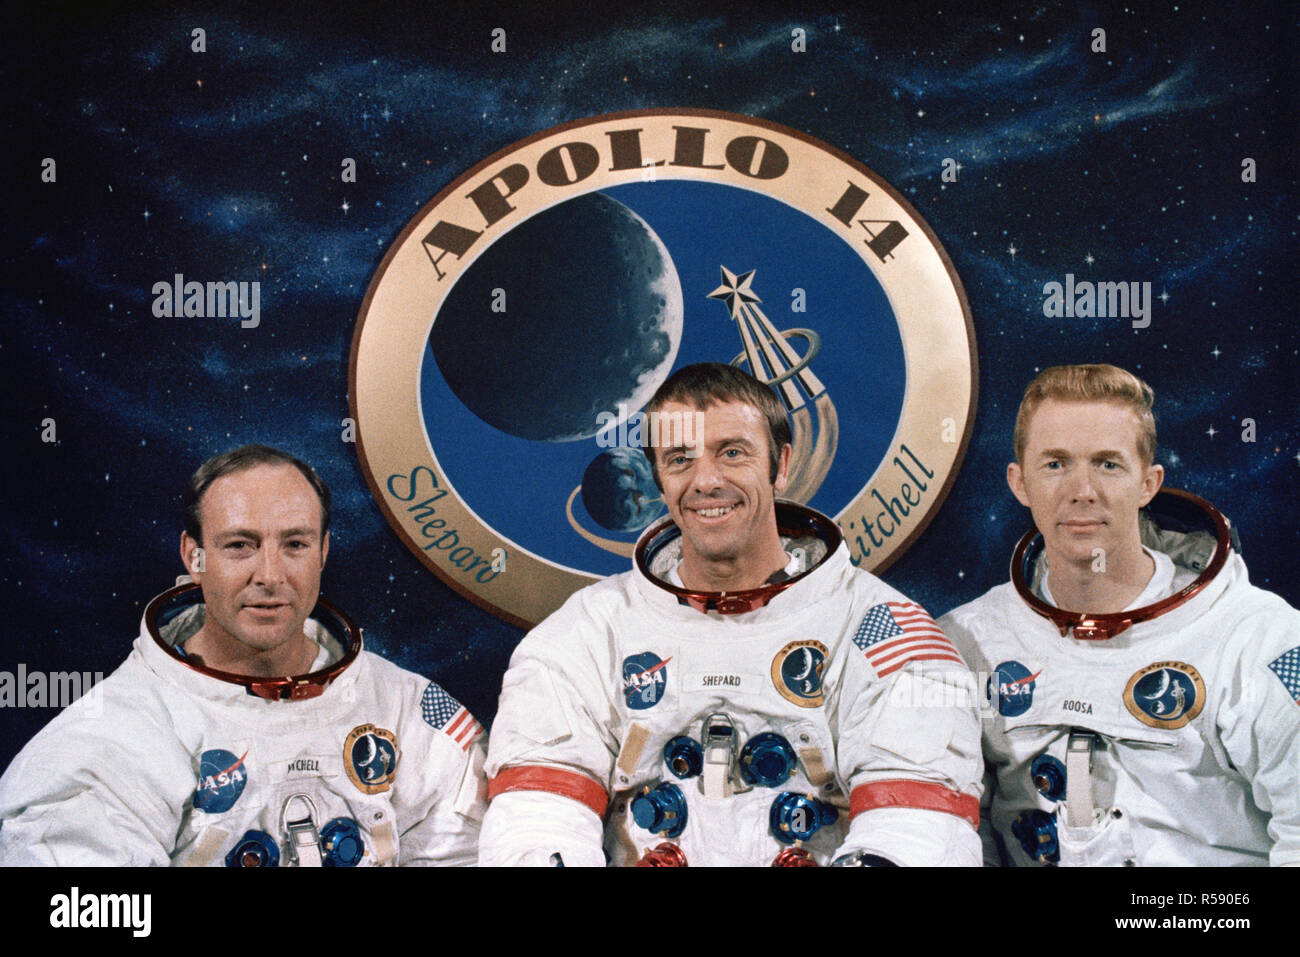 (December 1970) --- These three astronauts are the prime crew of the Apollo 14 lunar landing mission. Left to right, are Edgar D. Mitchell, lunar module pilot; Alan B. Shepard Jr., commander; and Stuart A. Roosa, command module pilot. The Apollo 14 emblem is in the background. Stock Photo